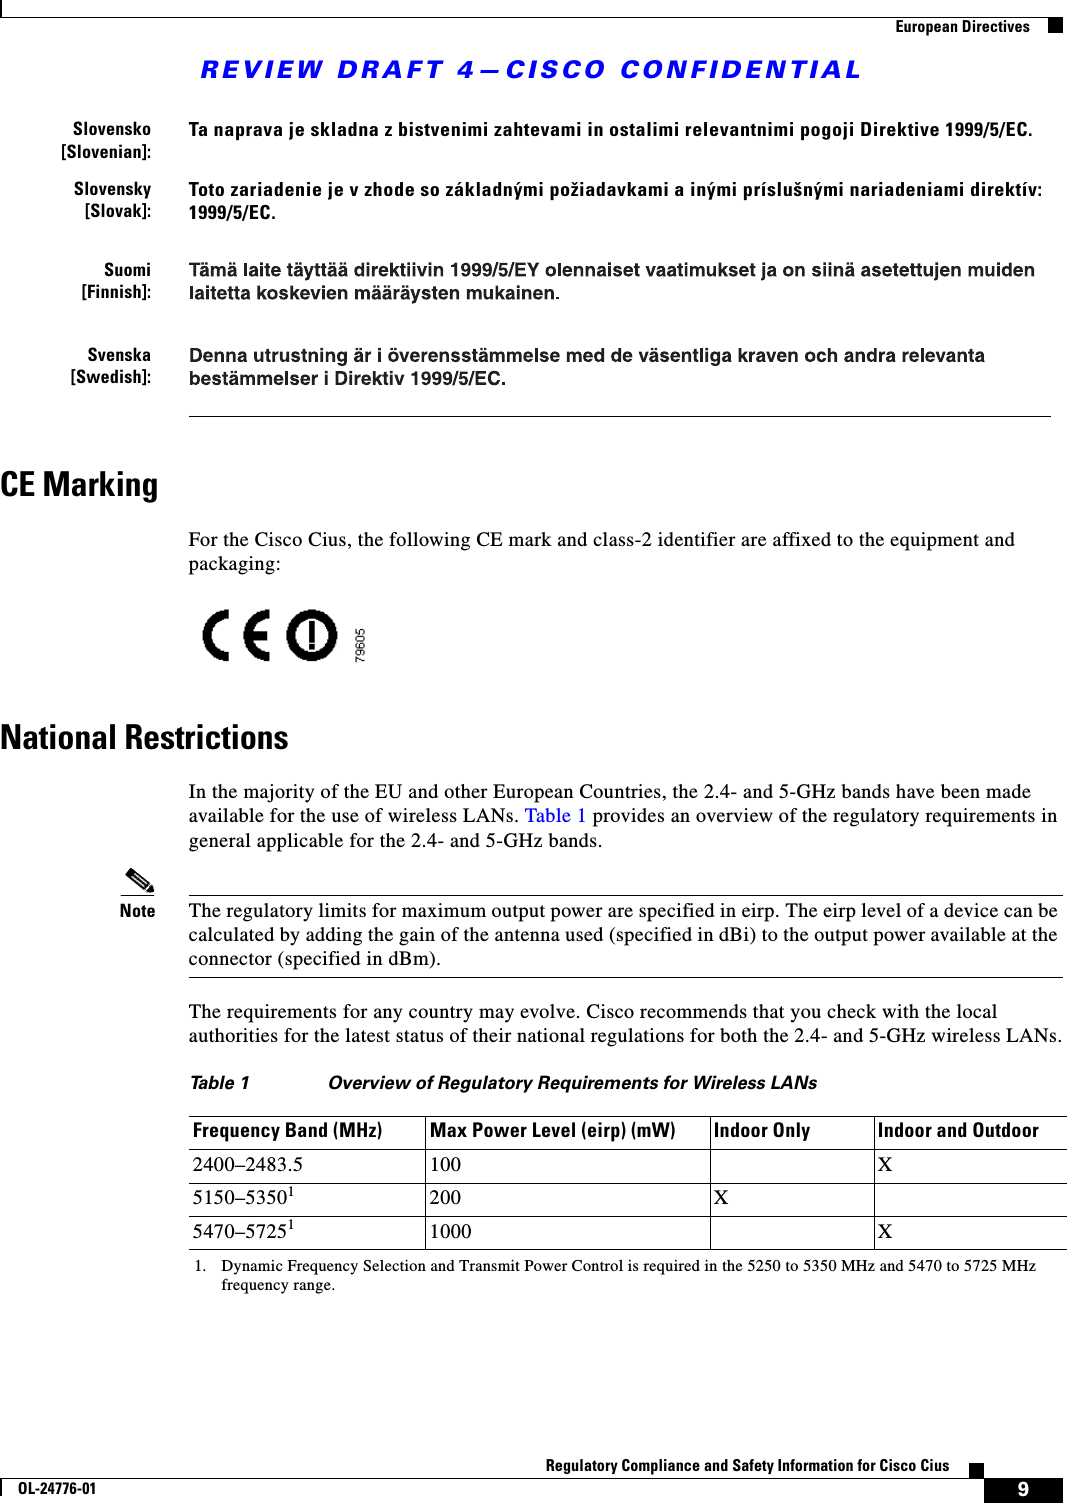 REVIEW DRAFT 4—CISCO CONFIDENTIAL9Regulatory Compliance and Safety Information for Cisco CiusOL-24776-01  European DirectivesCE MarkingFor the Cisco Cius, the following CE mark and class-2 identifier are affixed to the equipment and packaging:National RestrictionsIn the majority of the EU and other European Countries, the 2.4- and 5-GHz bands have been made available for the use of wireless LANs. Table 1 provides an overview of the regulatory requirements in general applicable for the 2.4- and 5-GHz bands.Note The regulatory limits for maximum output power are specified in eirp. The eirp level of a device can be calculated by adding the gain of the antenna used (specified in dBi) to the output power available at the connector (specified in dBm).The requirements for any country may evolve. Cisco recommends that you check with the local authorities for the latest status of their national regulations for both the 2.4- and 5-GHz wireless LANs.Slovensko [Slovenian]:Ta naprava je skladna z bistvenimi zahtevami in ostalimi relevantnimi pogoji Direktive 1999/5/EC.Slovensky [Slovak]:Toto zariadenie je v zhode so základnými požiadavkami a inými príslušnými nariadeniami direktív: 1999/5/EC. Suomi [Finnish]: Svenska [Swedish]: Table 1 Overview of Regulatory Requirements for Wireless LANs Frequency Band (MHz) Max Power Level (eirp) (mW) Indoor Only Indoor and Outdoor2400–2483.5 100 X5150–535011. Dynamic Frequency Selection and Transmit Power Control is required in the 5250 to 5350 MHz and 5470 to 5725 MHz frequency range.200 X5470–572511000 X